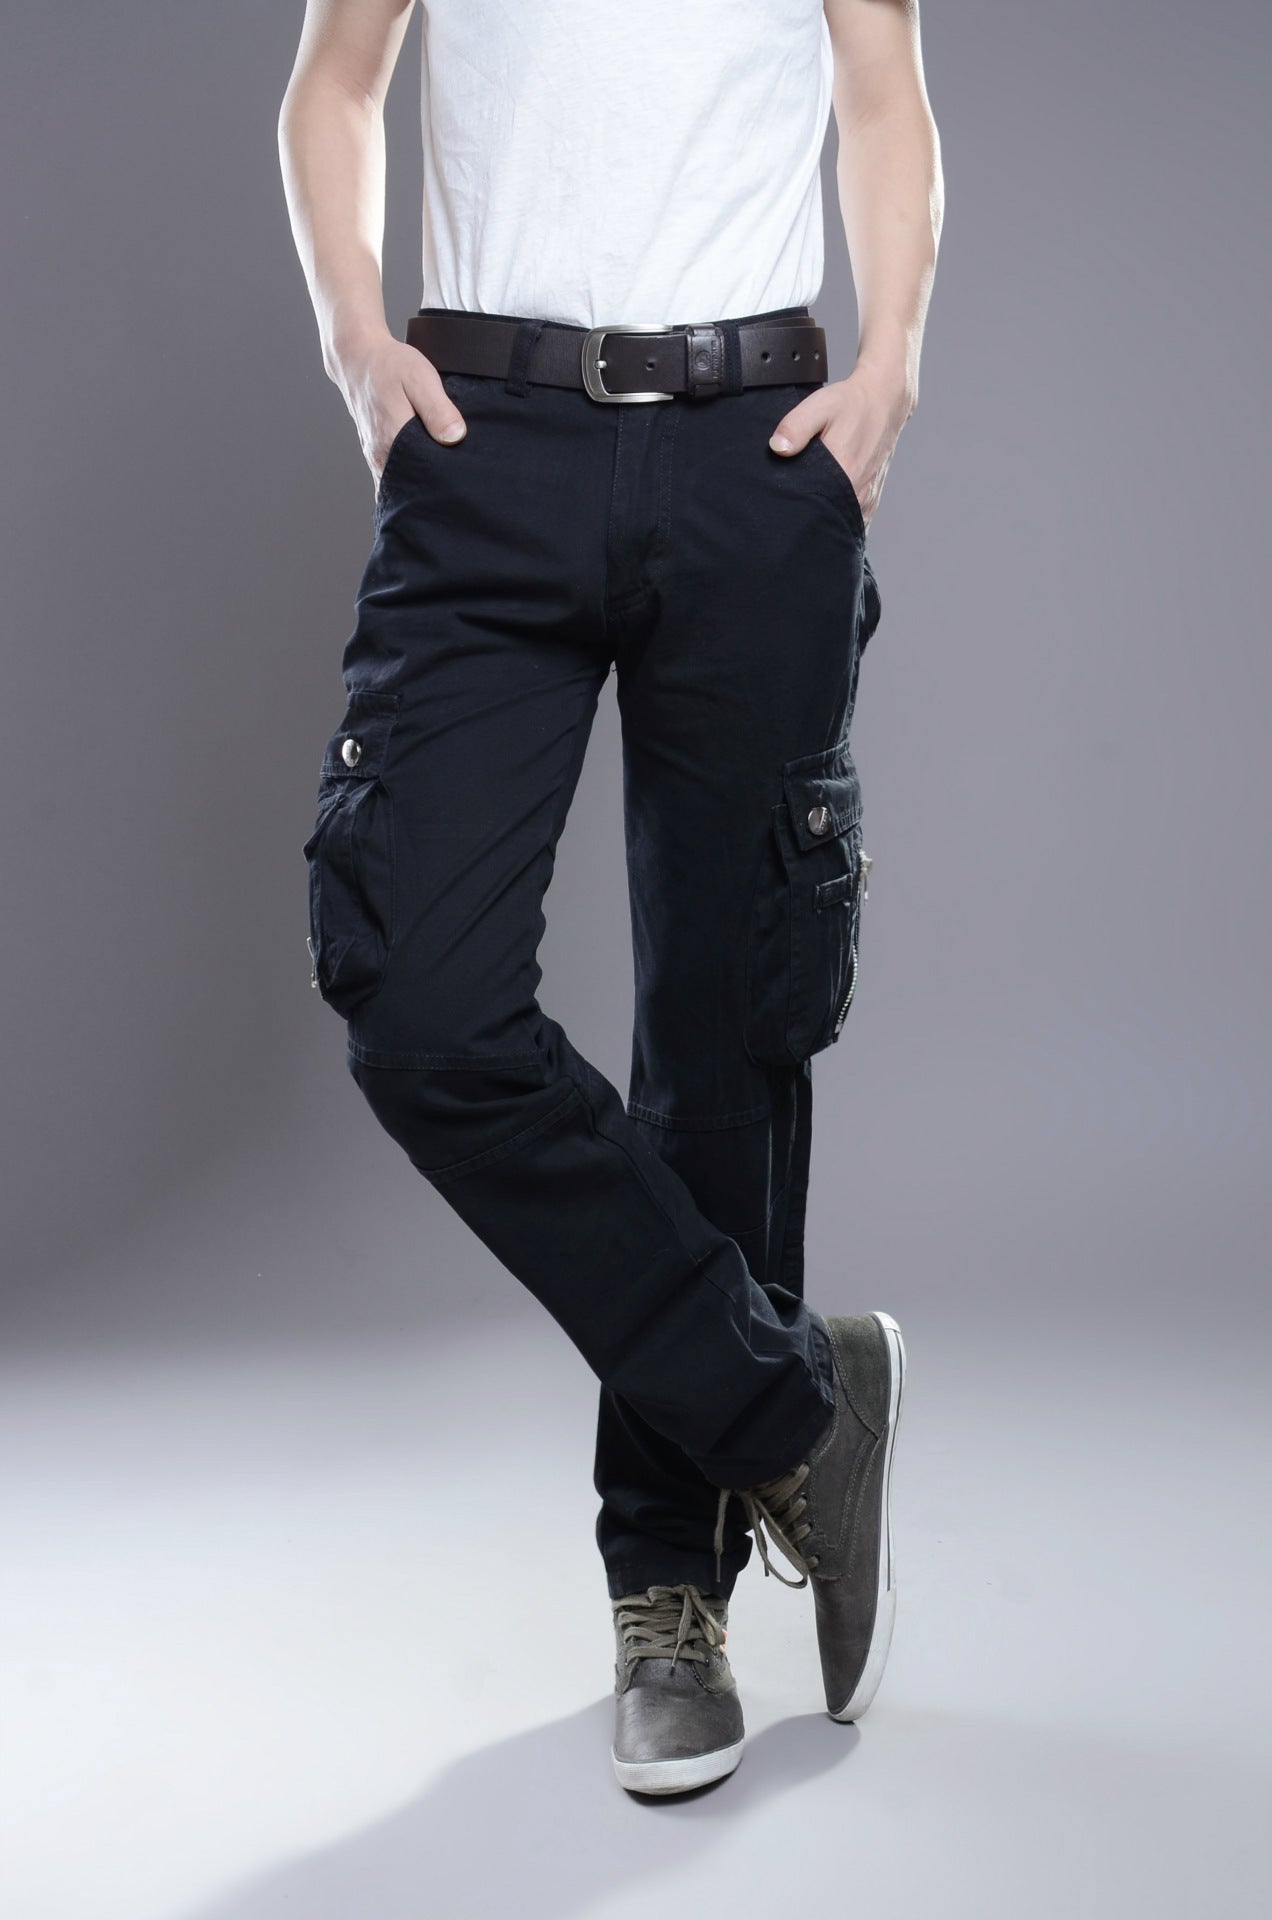 Spring And Autumn Foreign Trade Men'S Workwear Pure Cotton New Casual Pants Men'S Multi-Pocket Workwear Pants Sports Cross-Border Communication